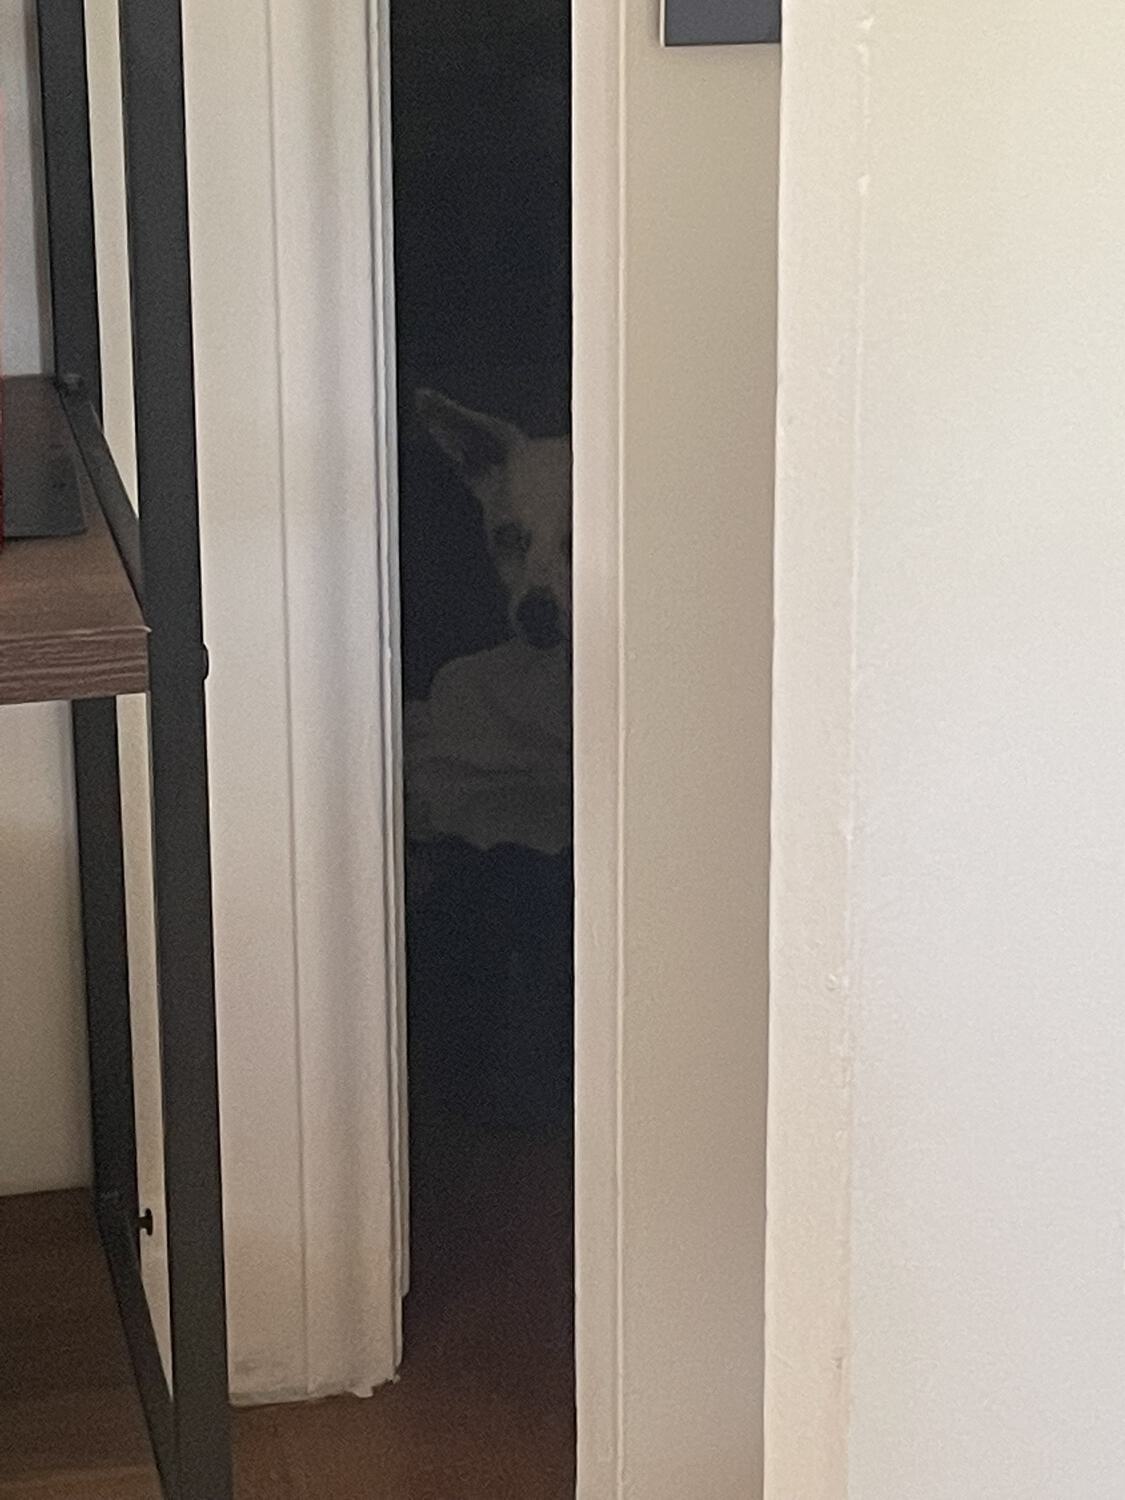 Travis the dog peeking out of a closet, where he is hiding in the dark